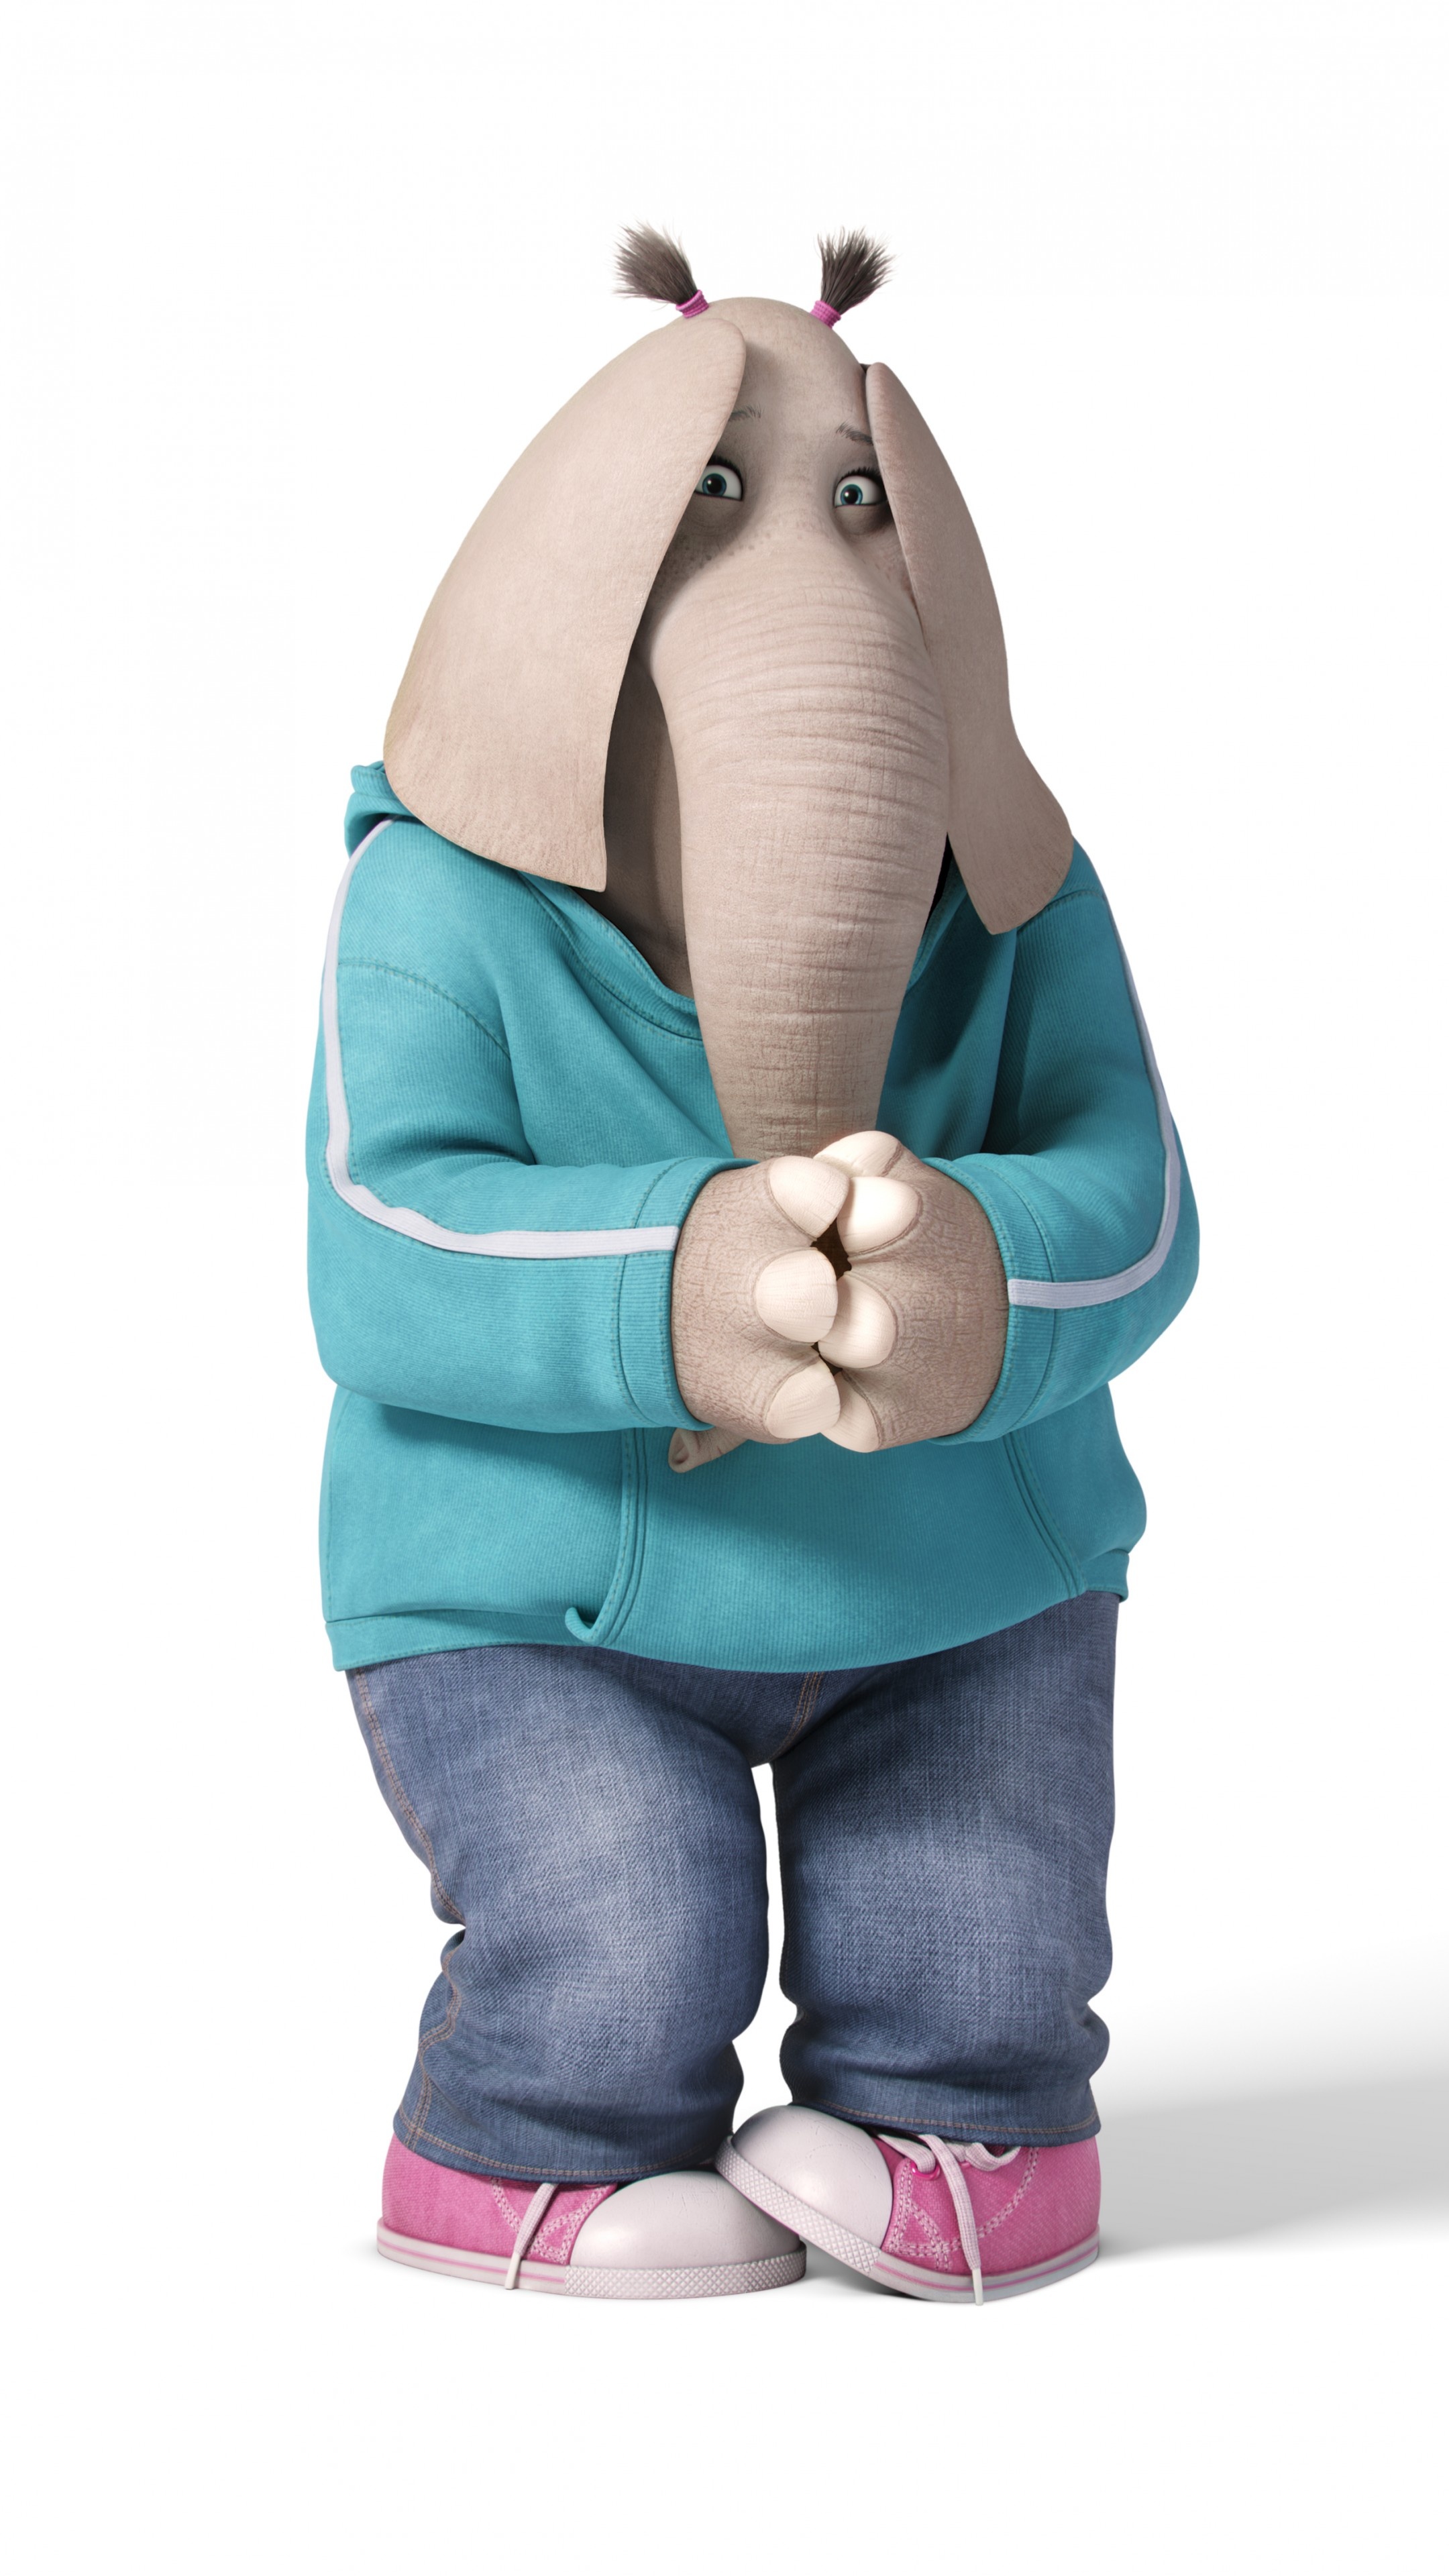 Sing animated movie, Talented elephant, Memorable animation, 2016's best films, 2160x3840 4K Handy